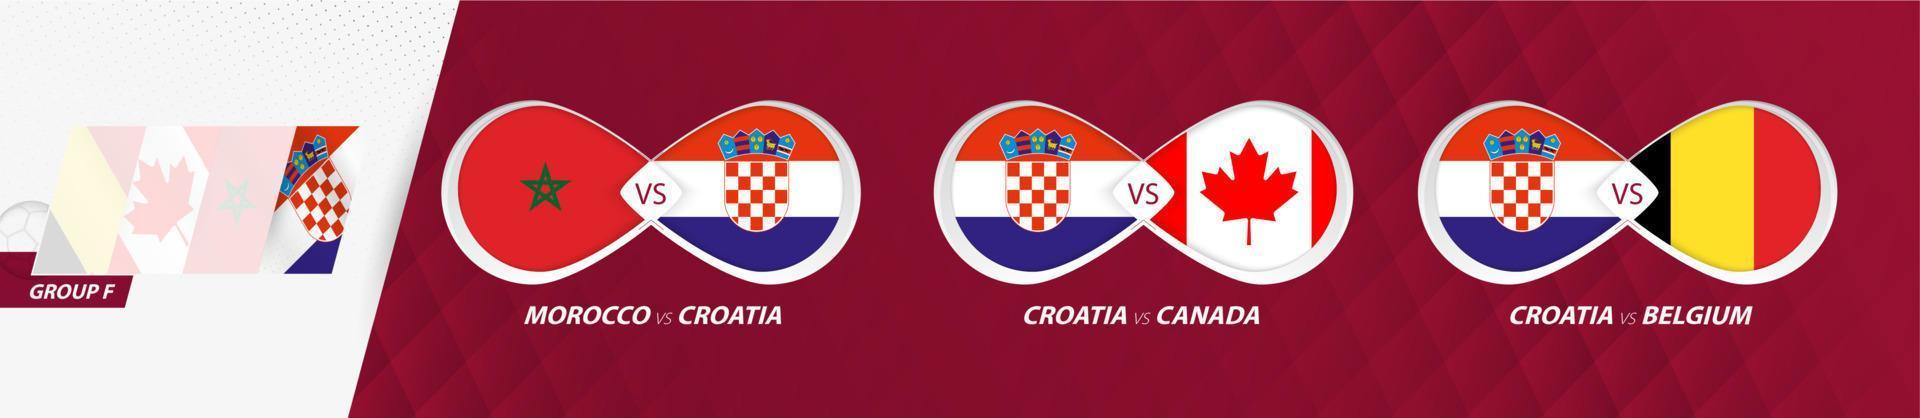 Croatia national team matches in group F, football competition 2022, all games icon in group stage. vector